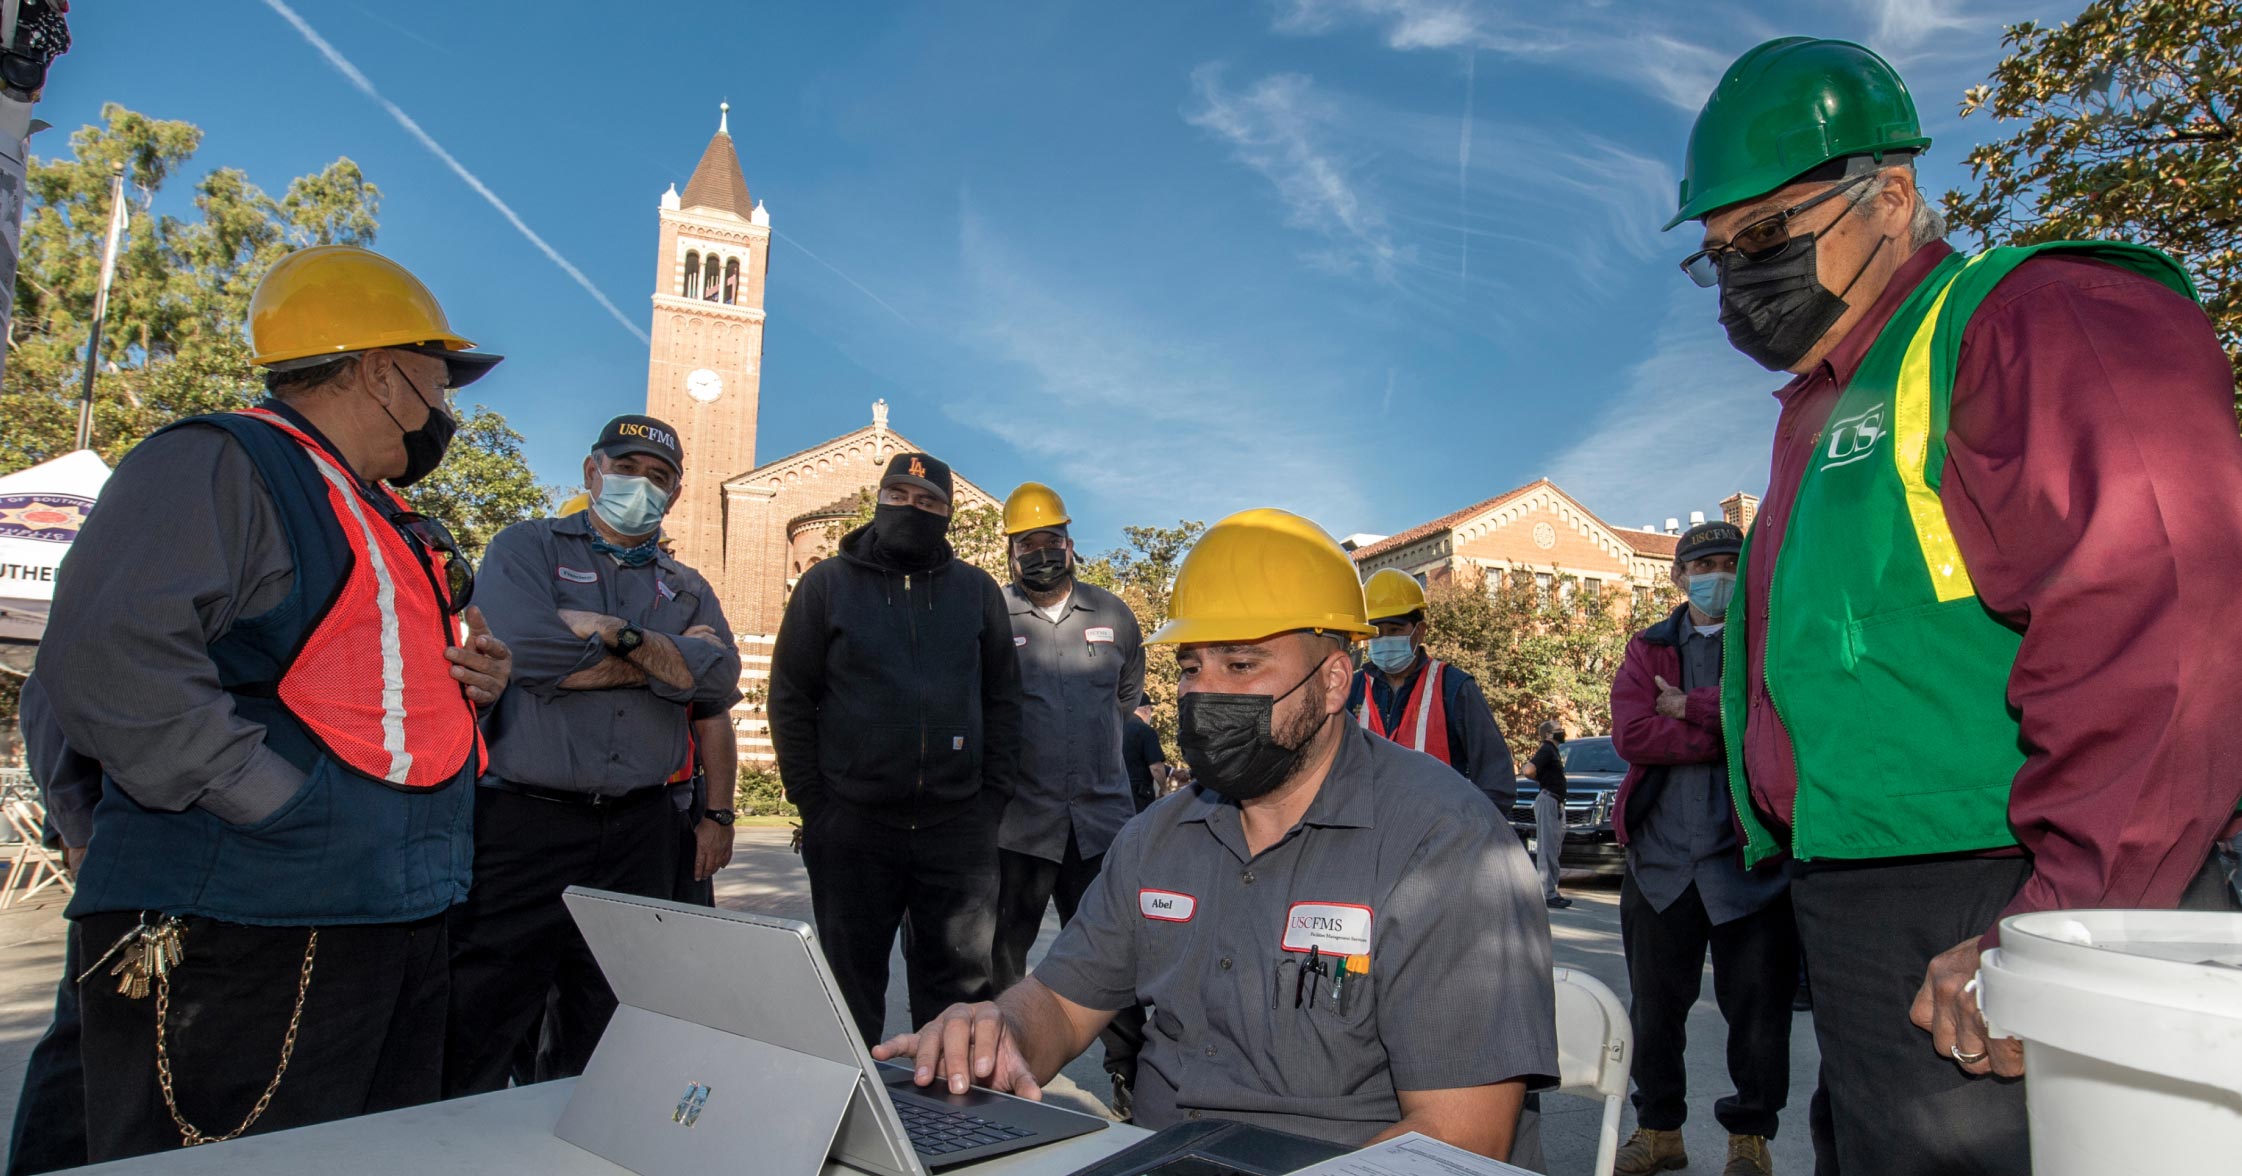 USC Facilities Planning & Management team conducting safety workshop outside on campus